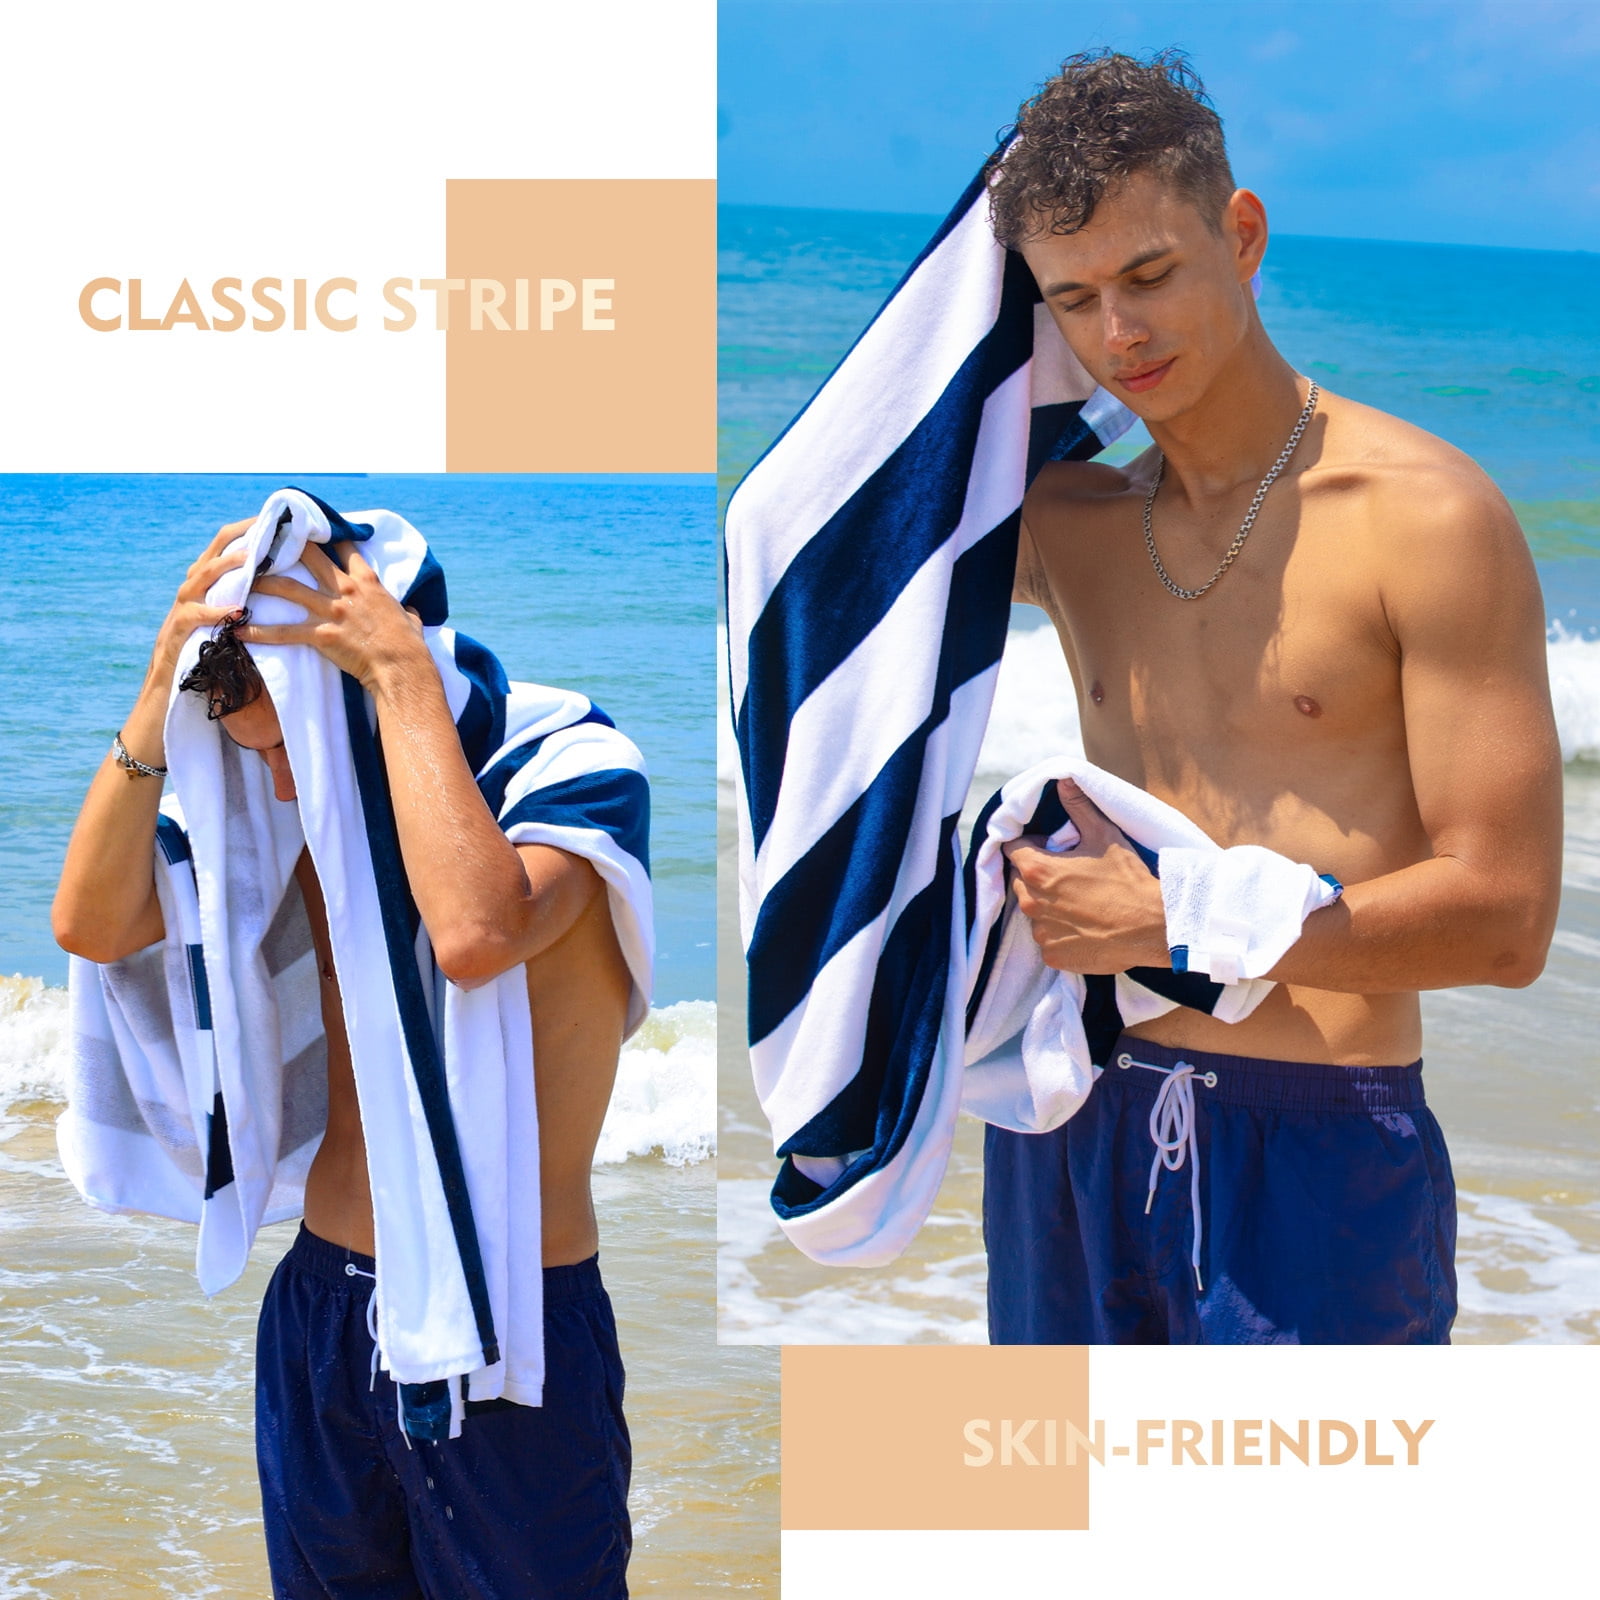  Forever S Bath Towels Bath Towels, 180×90cm(70×35in) Oversized Bath  Towels, Men's and Women's Household Cotton Beach Towels, Extra Large Plus  Thick Bath Sheets Towels (Color : C) : Home & Kitchen